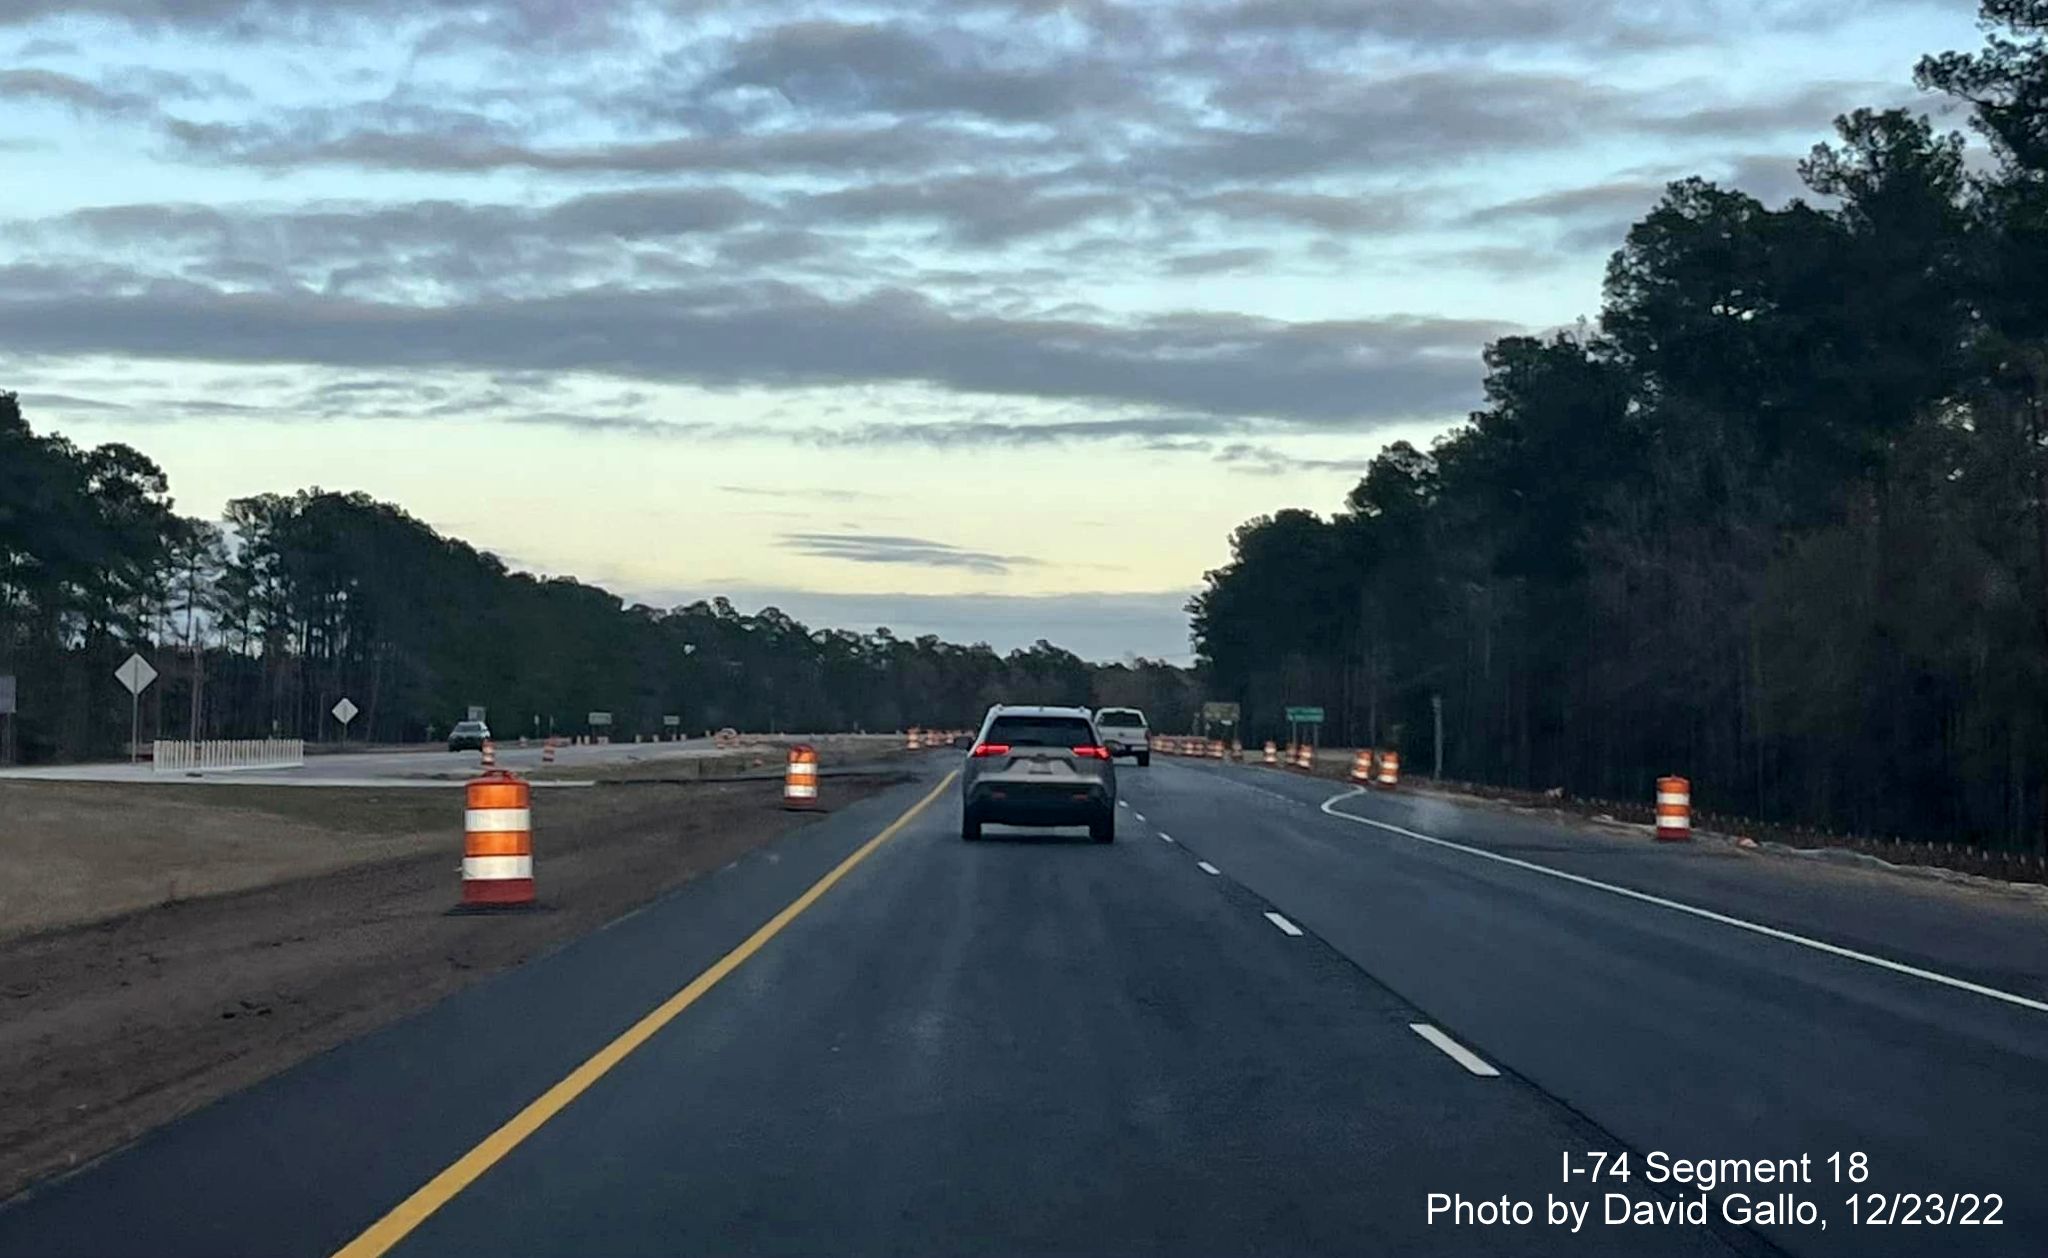 Image of approaching the Old Lake Road intersection in Lake Waccamaw interchange work zone on US 74/76 East, by David Gallo, December 2022